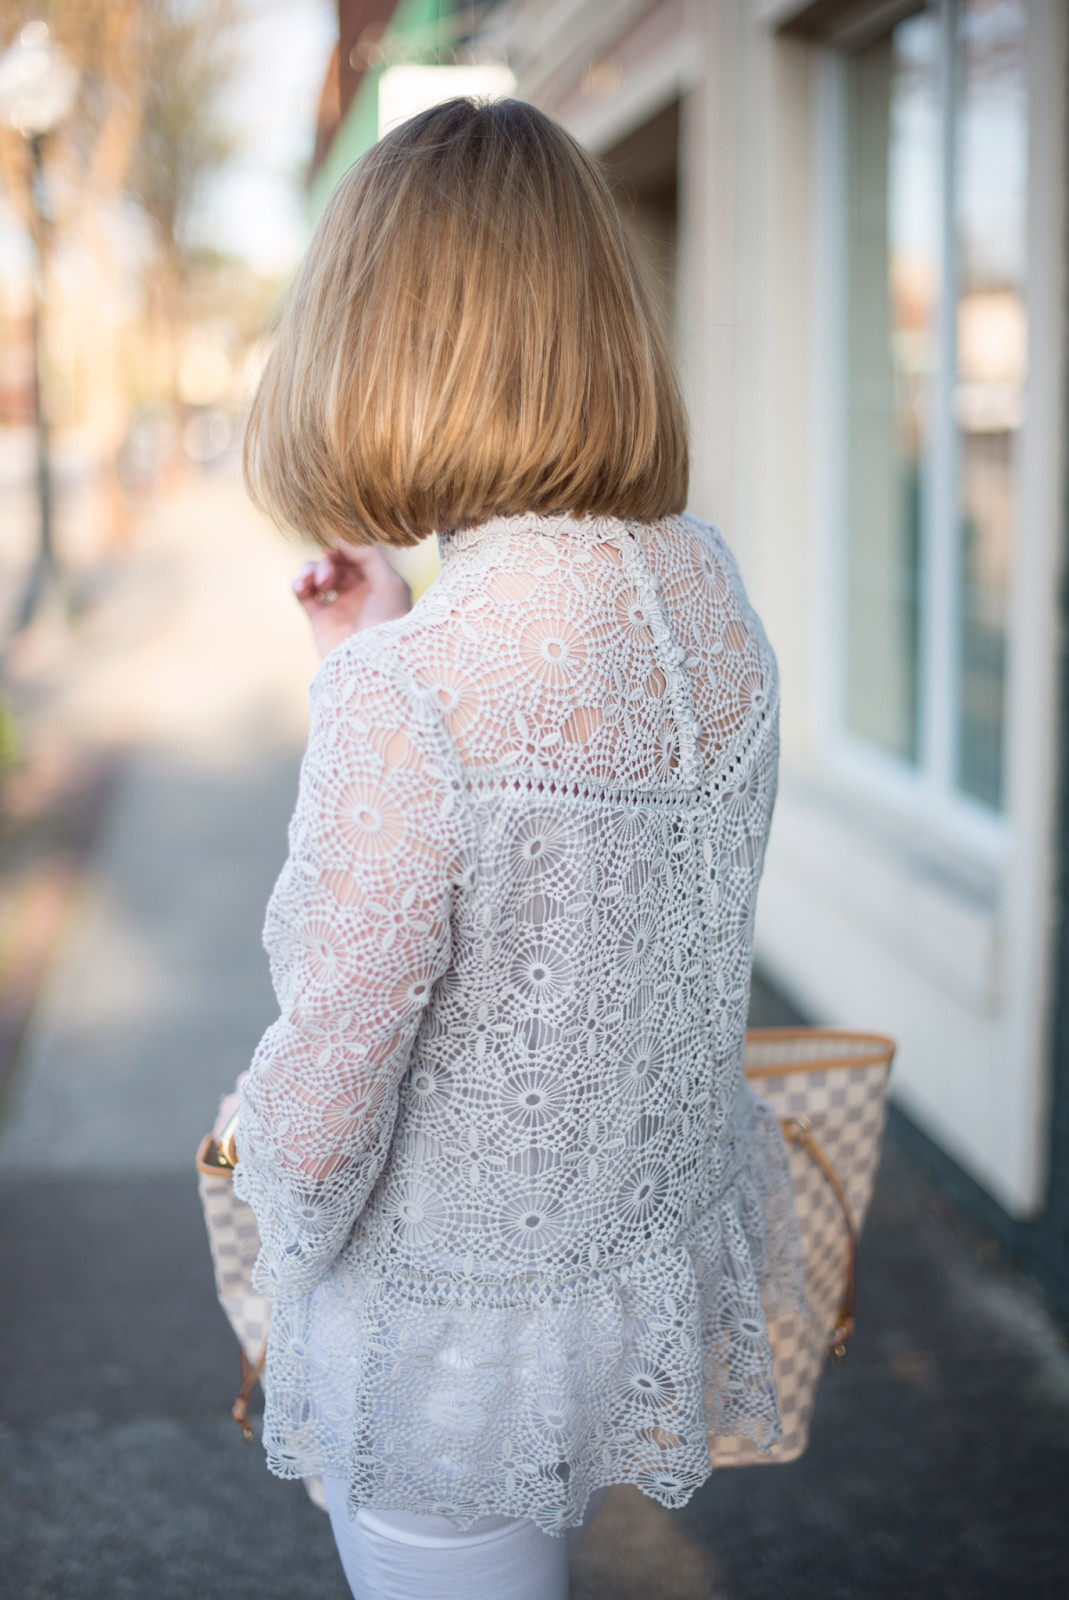 Lace Top for Spring - Click through to see more!